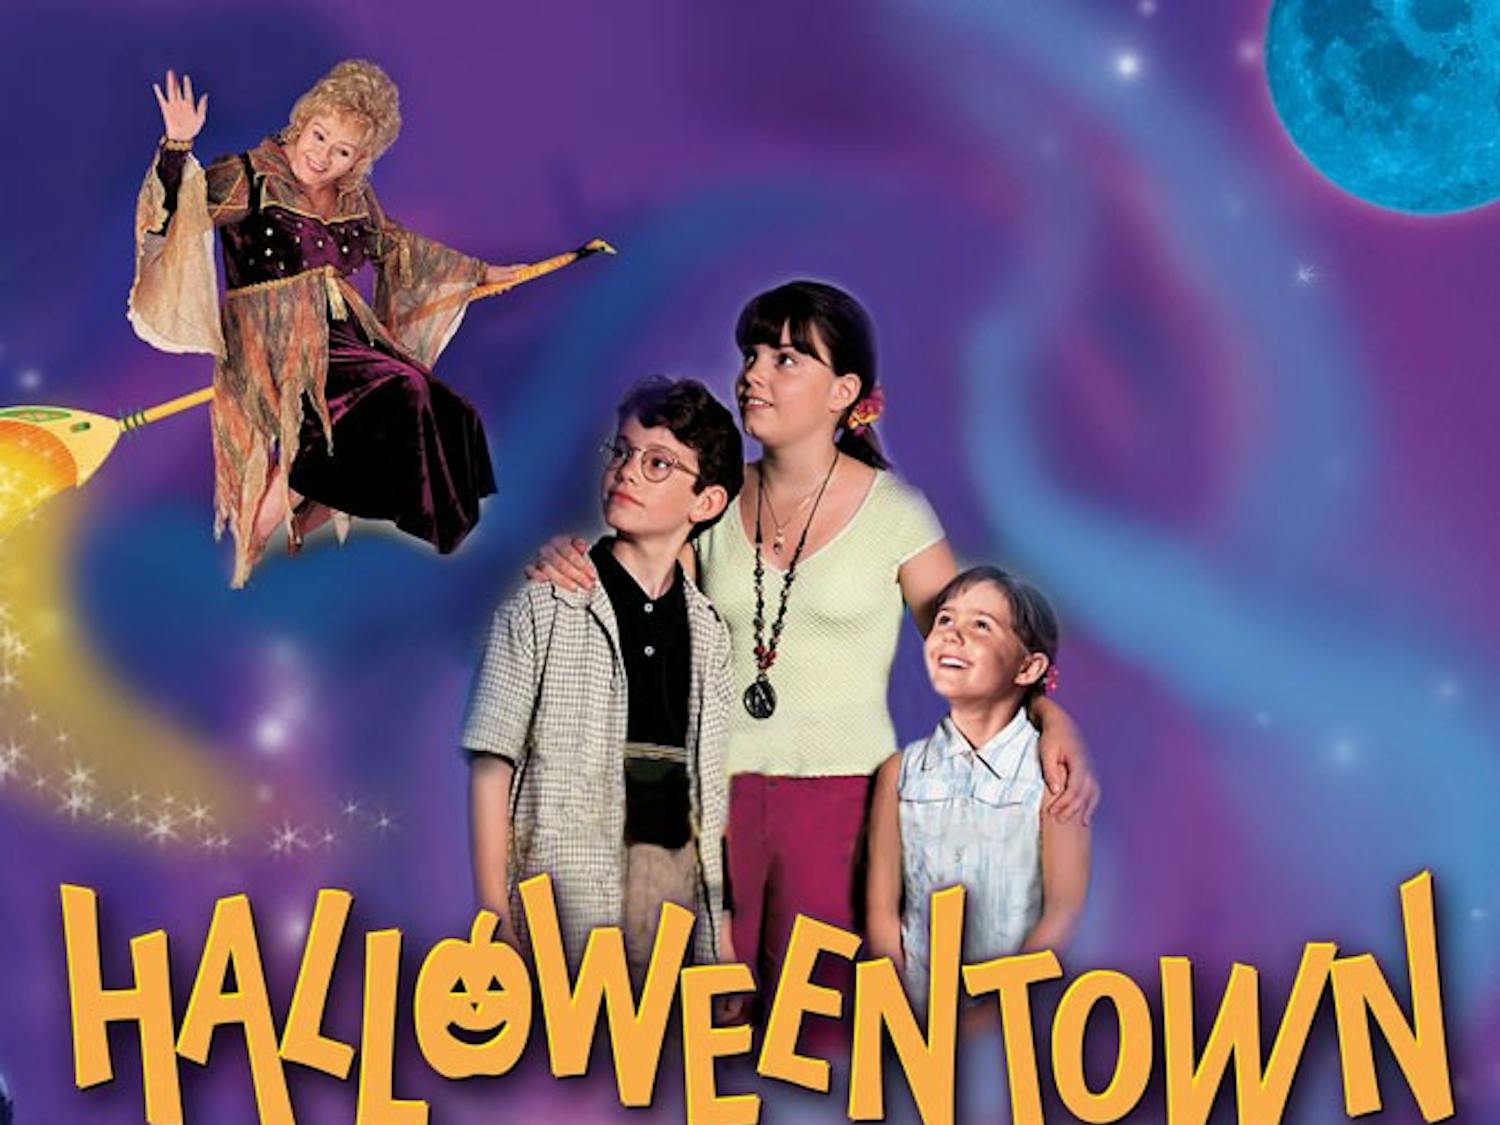 Disney has a host of Halloween movies that were instant classics when they came out. This nostalgic list is filled with some of the greatest movies from the ’90s and ’00s such as “Halloween Town,” and “The Nightmare Before Christmas.”